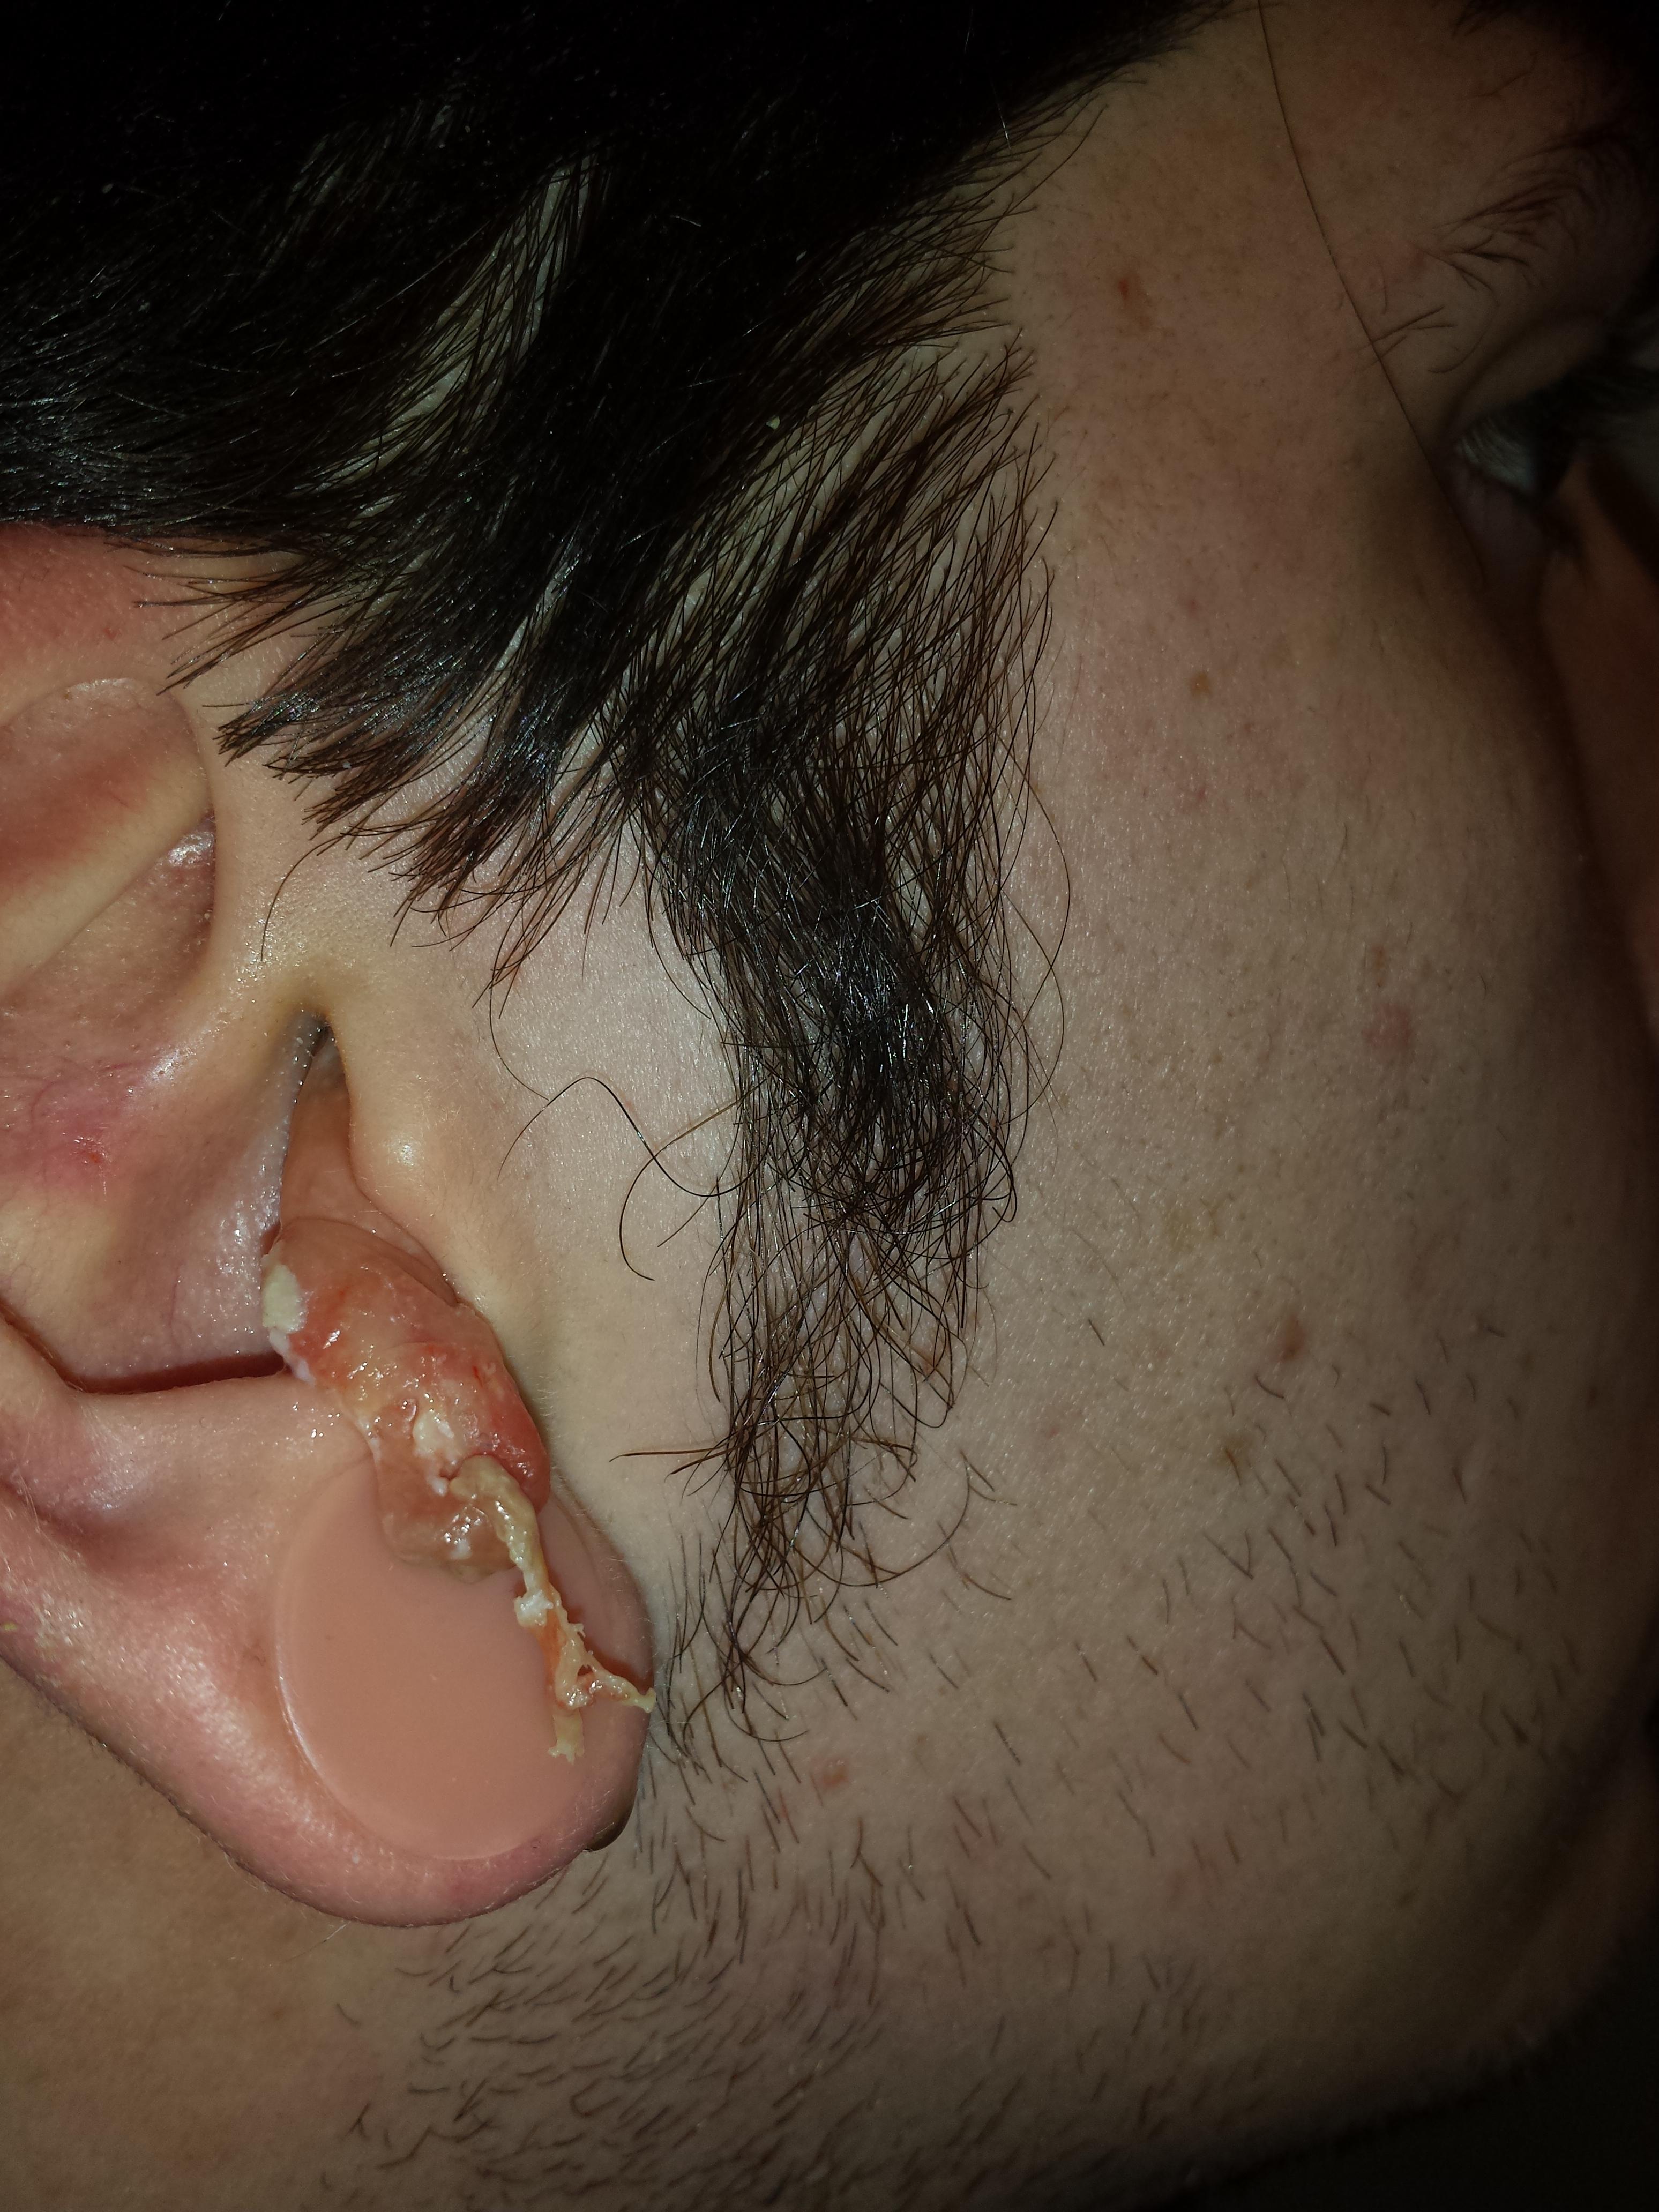 Ear Infection 9